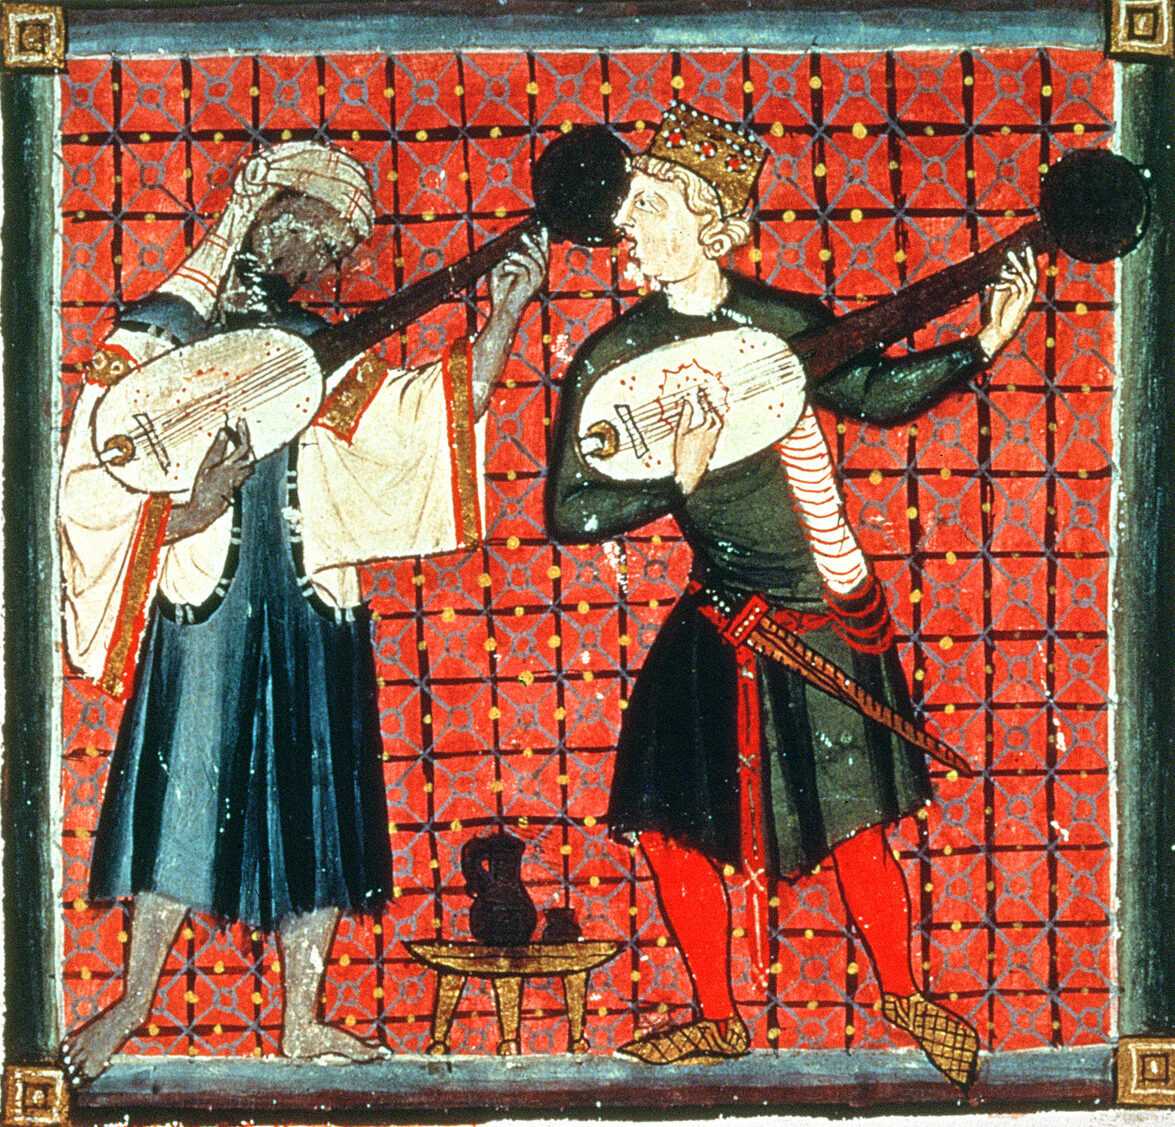 Illustration of Muslim and Christian Musicians